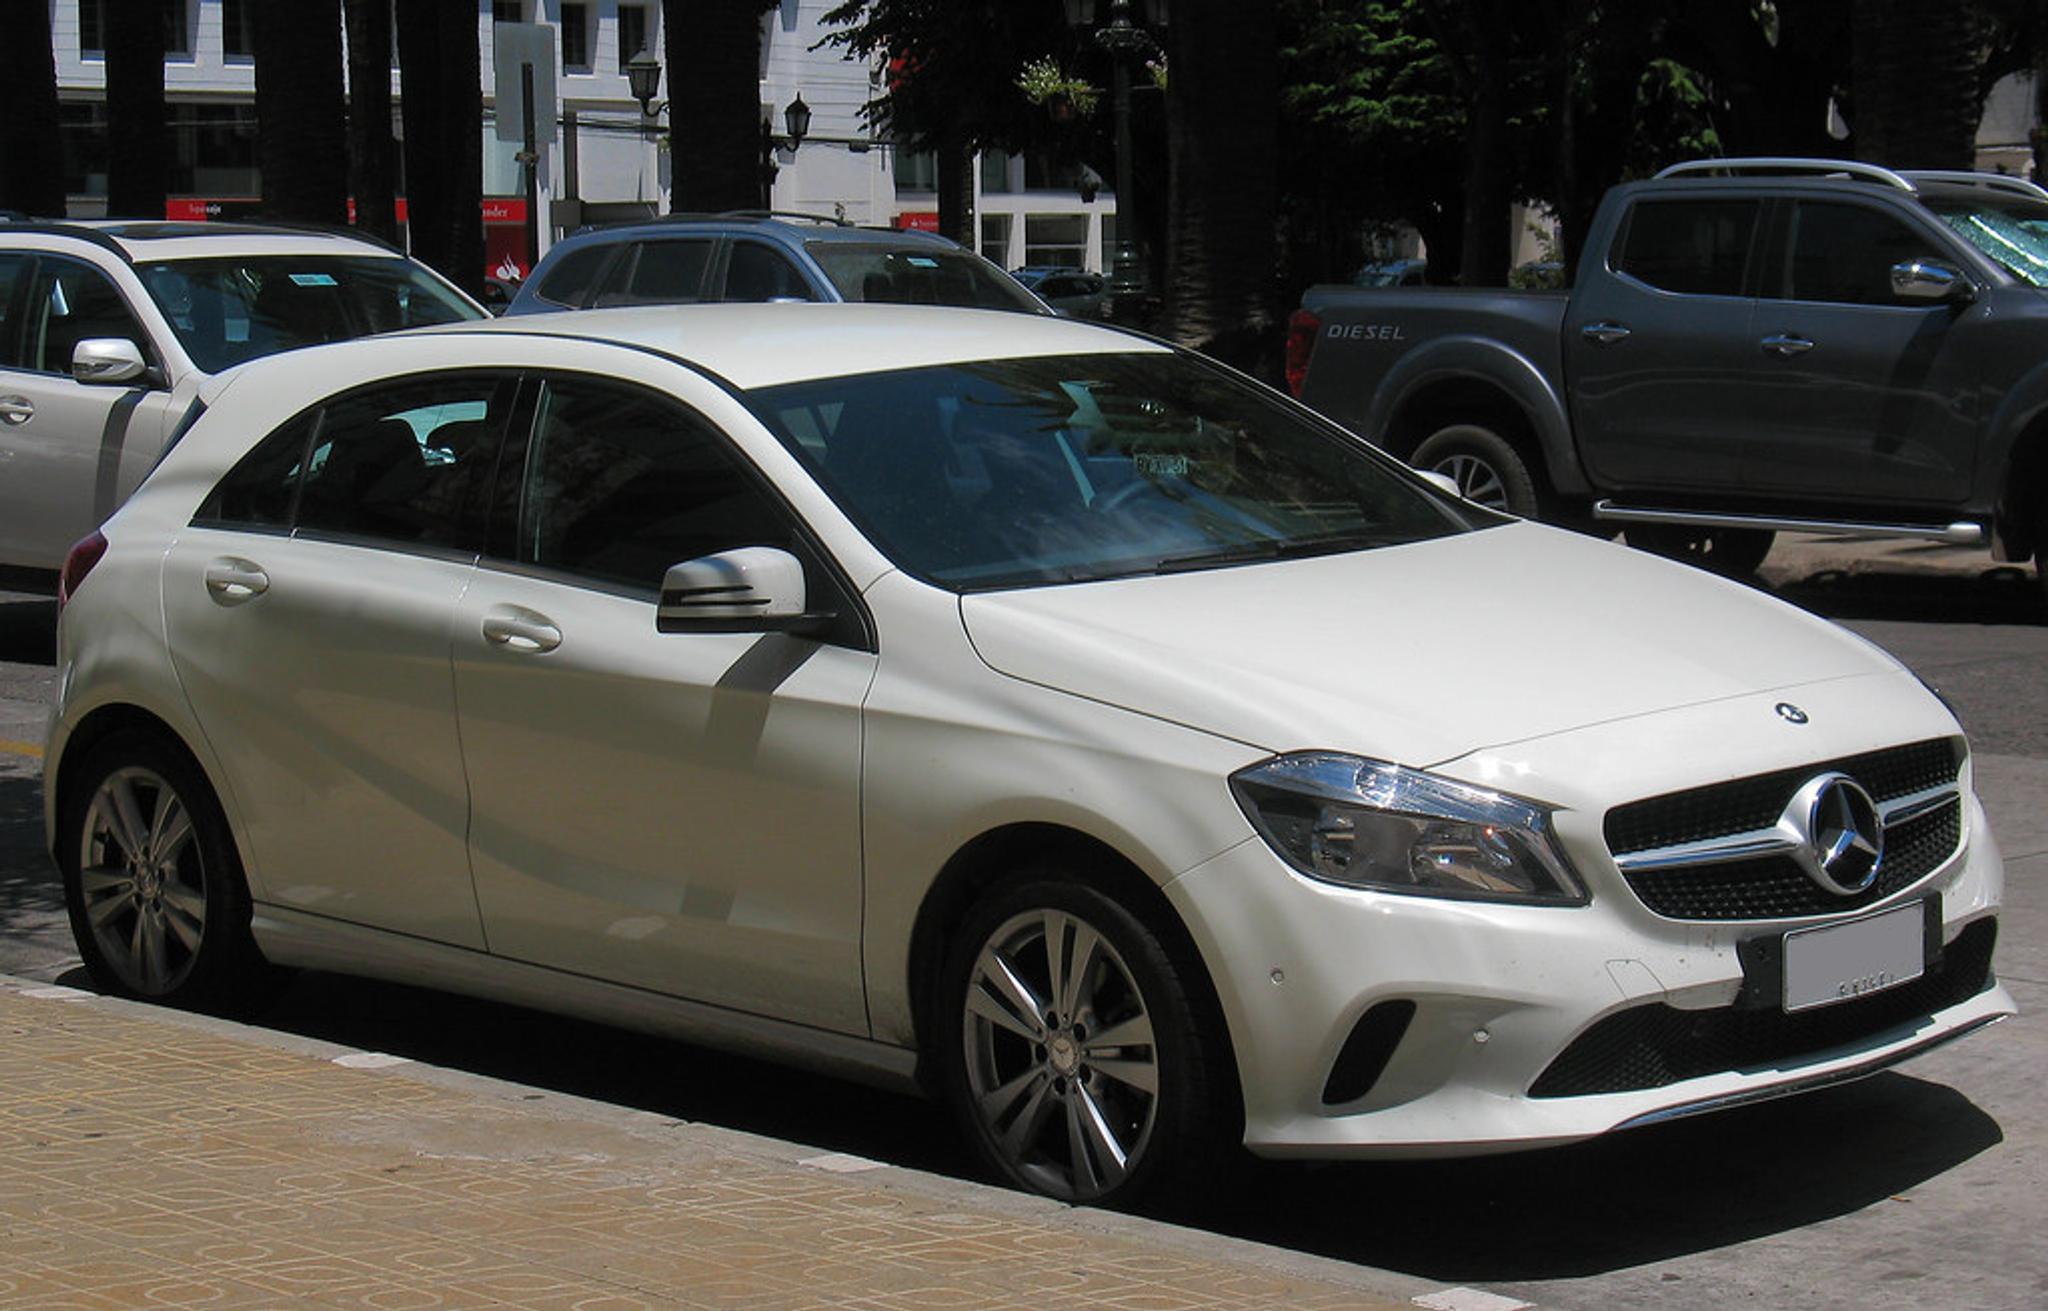 White Mercedes-Benz A Class parked by the side of the road